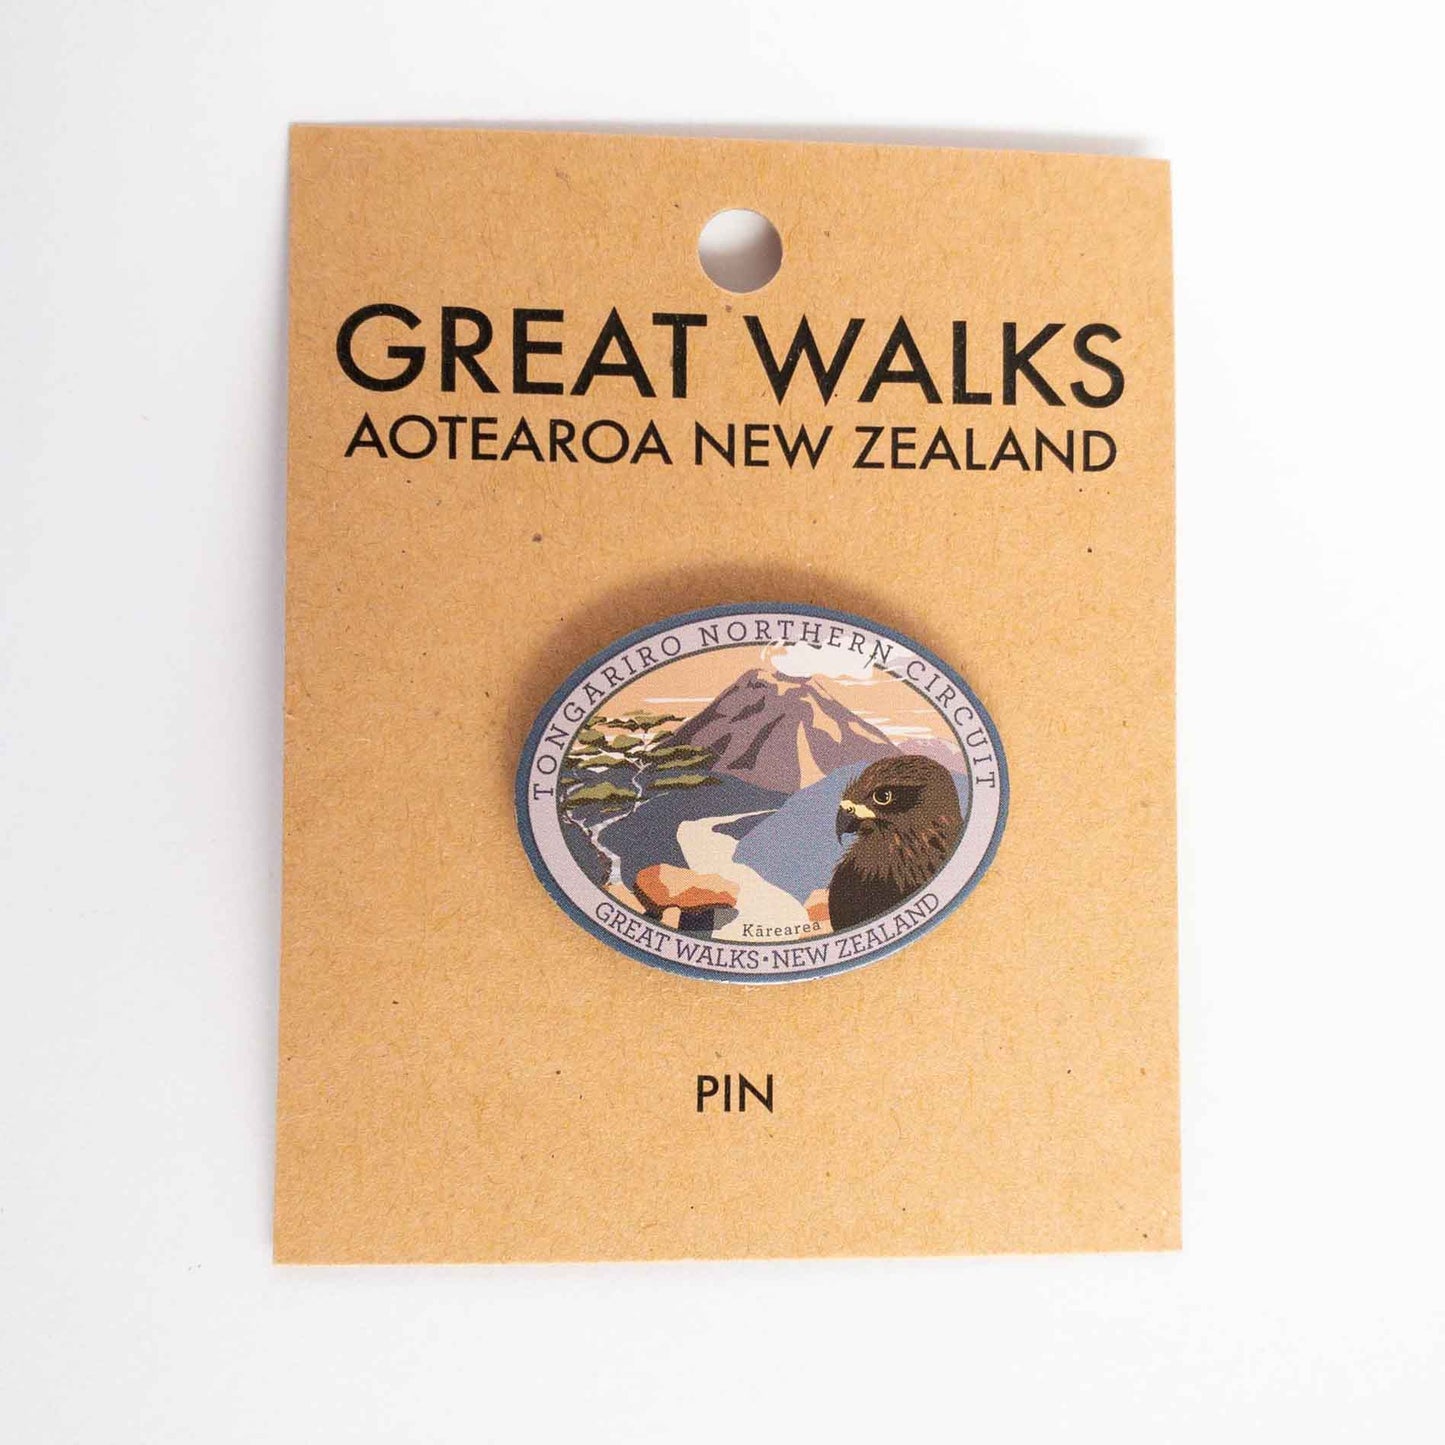 Oval Paparoa Track pin, with a weka, green hills, mountain daisy and tussock, on brown kraft backing card.